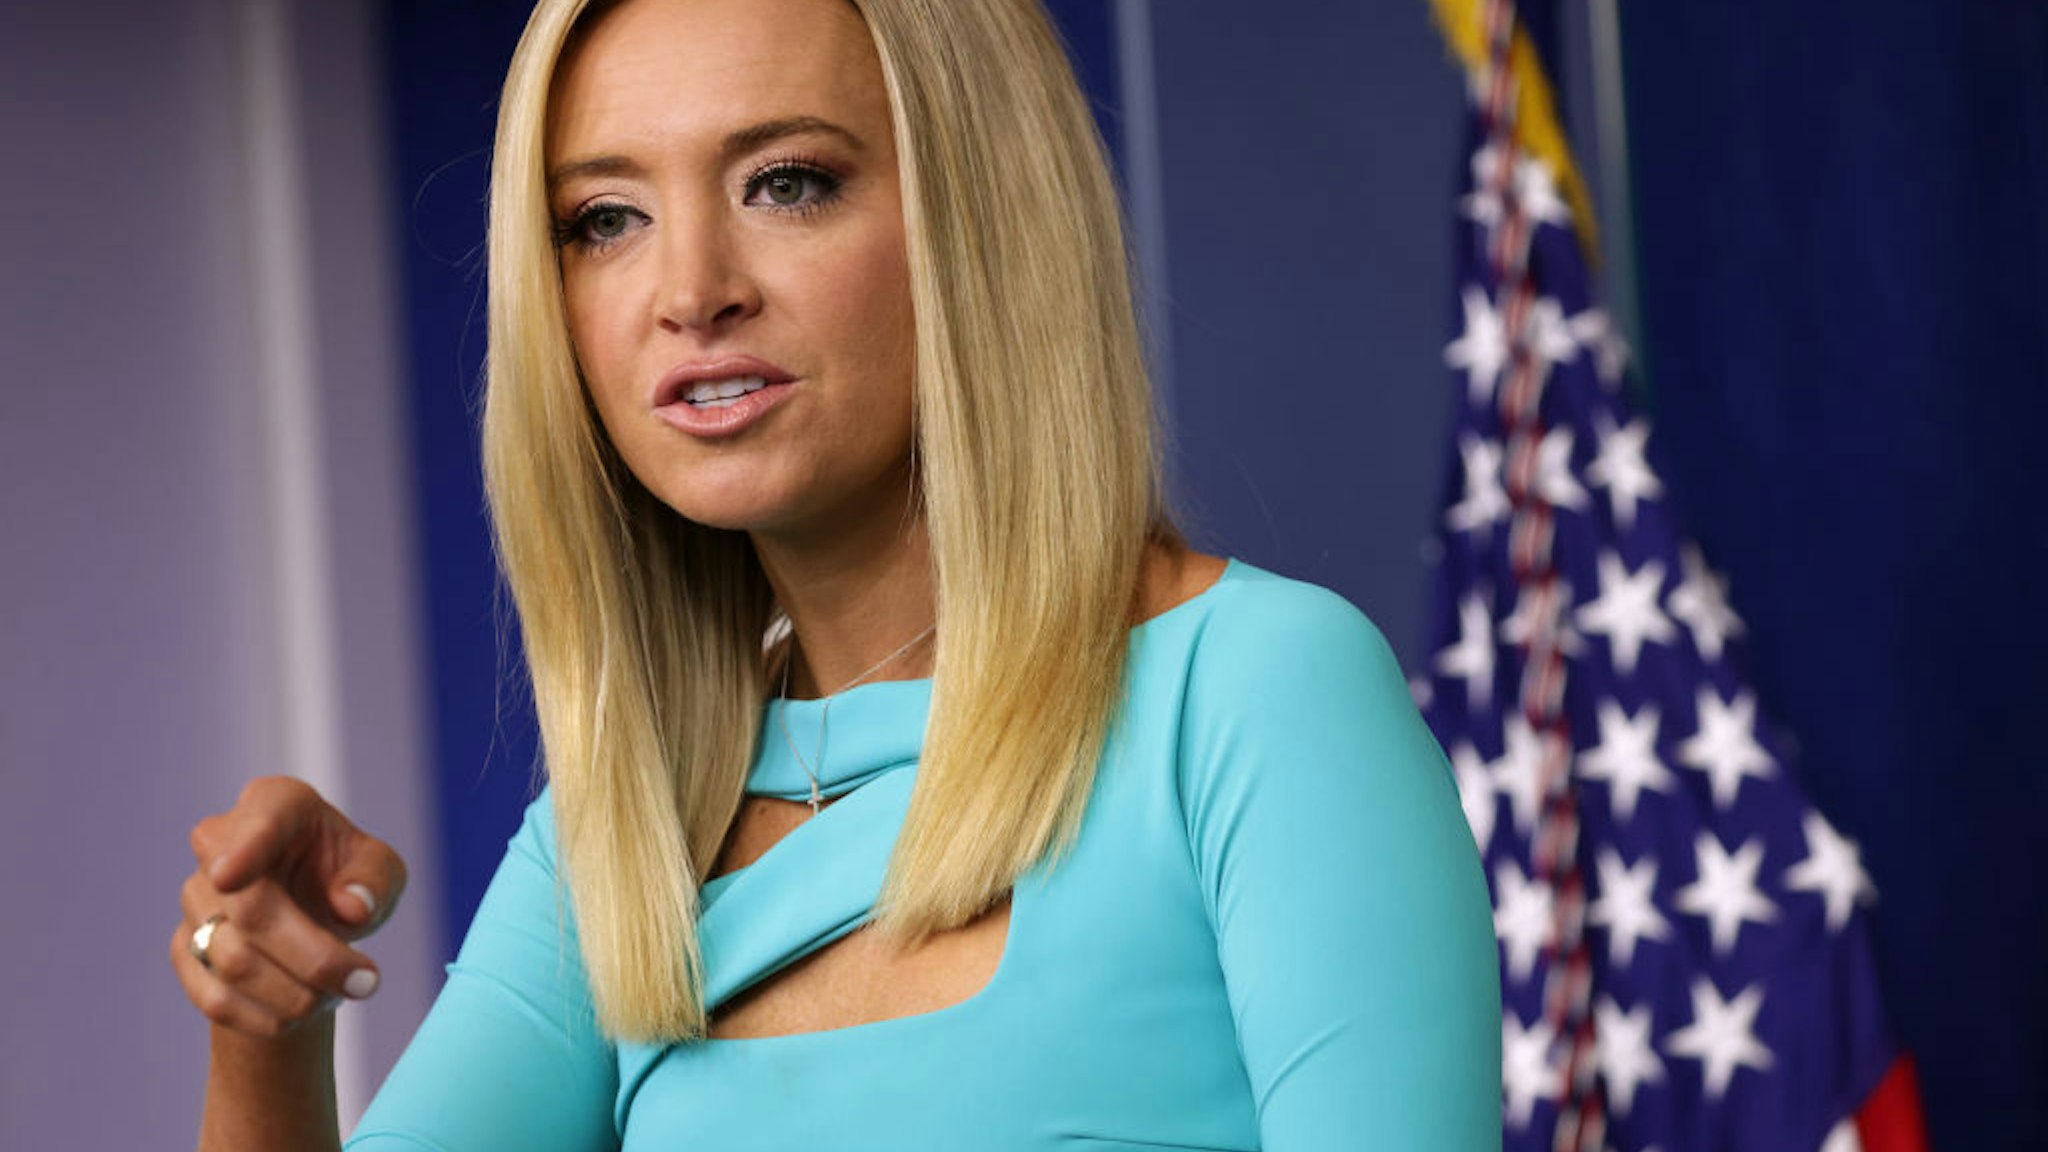 White House Press Secretary Kayleigh McEnany holds a news conference at the James Brady Press Briefing Room of the White House September 16, 2020 in Washington, DC.